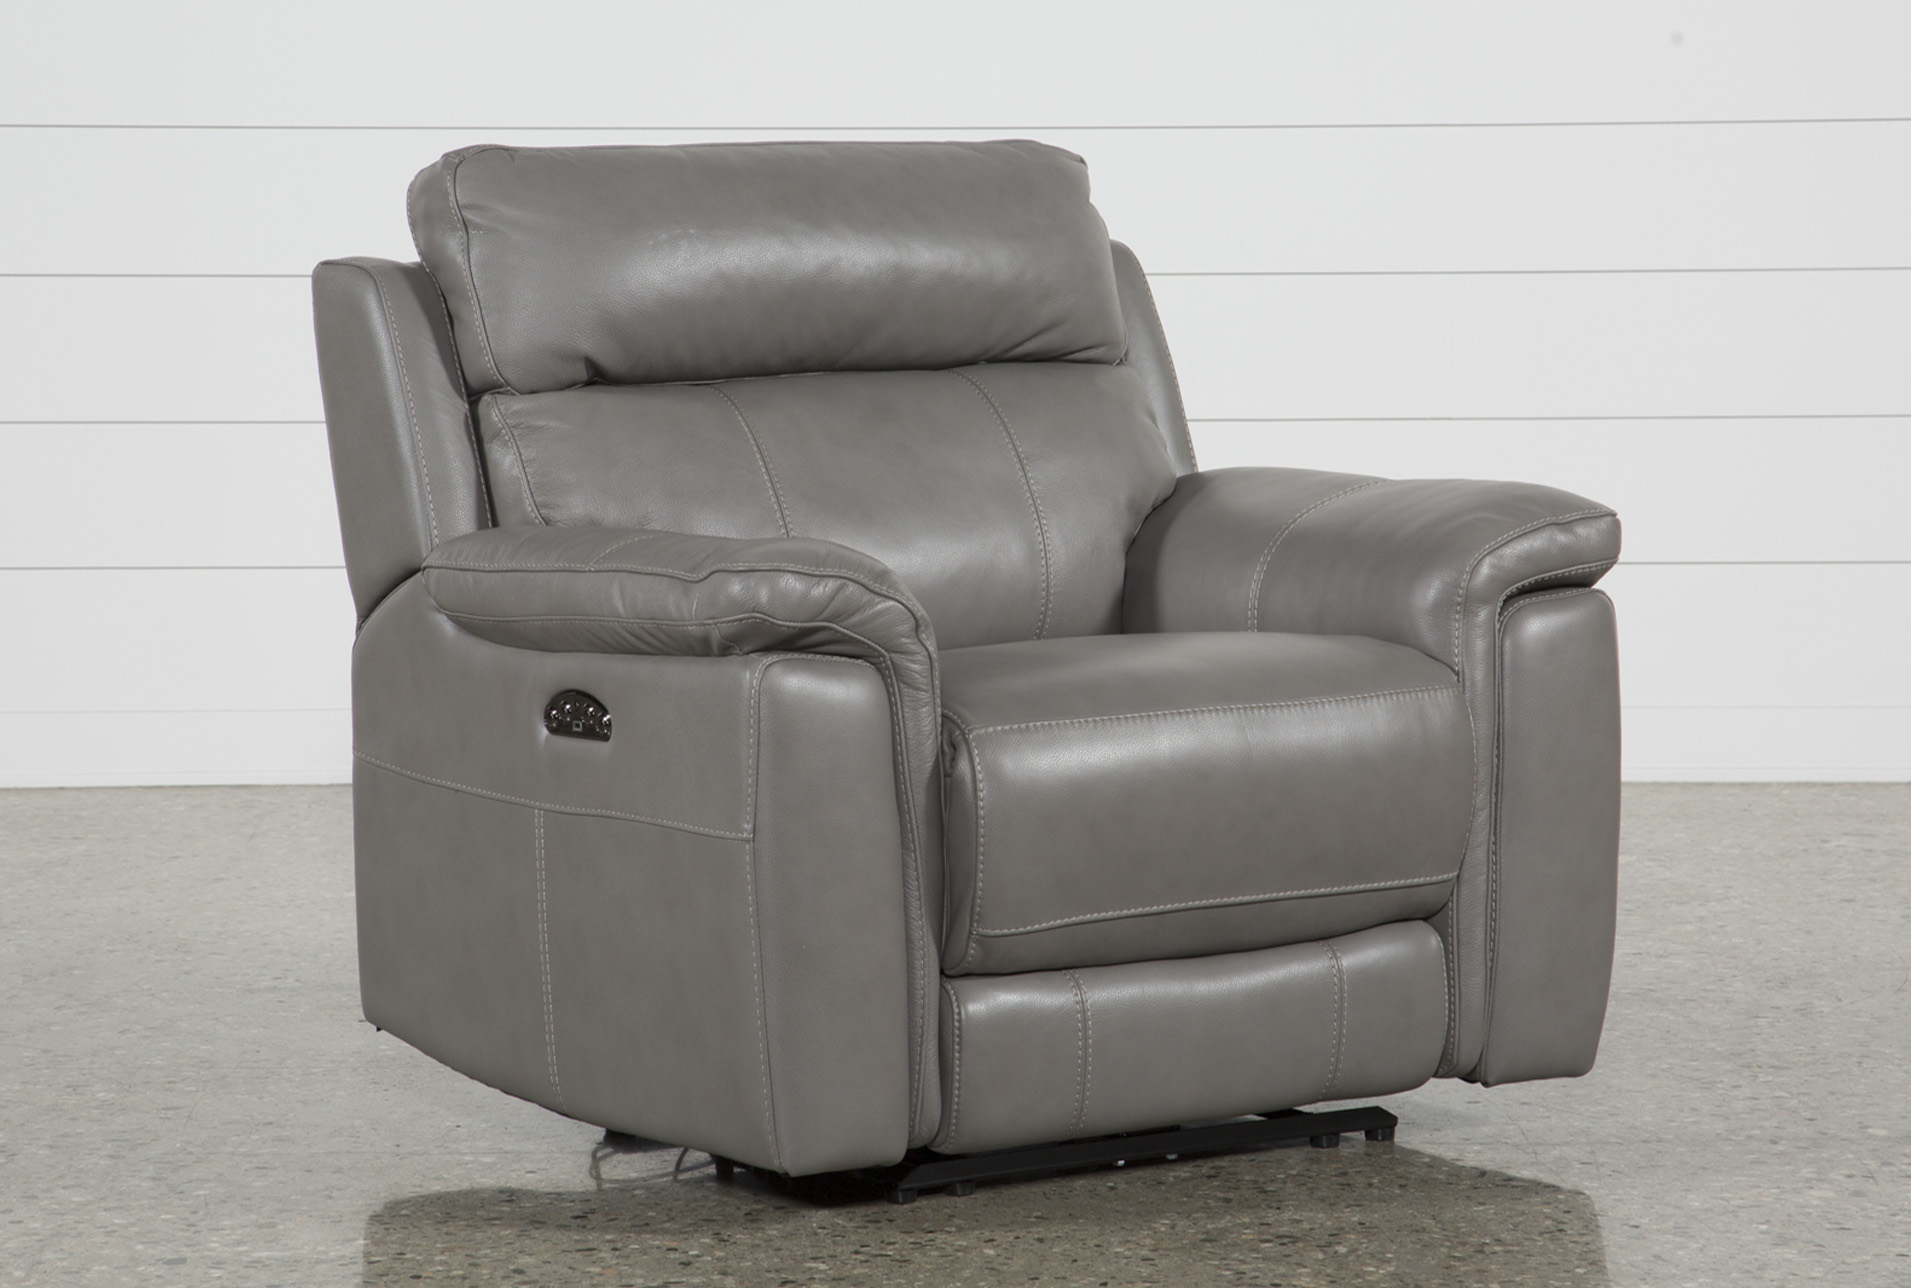 Dino Grey Leather Power Recliner W/Power Headrest & Usb (Qty: 1) has  been successfully added to your Cart.